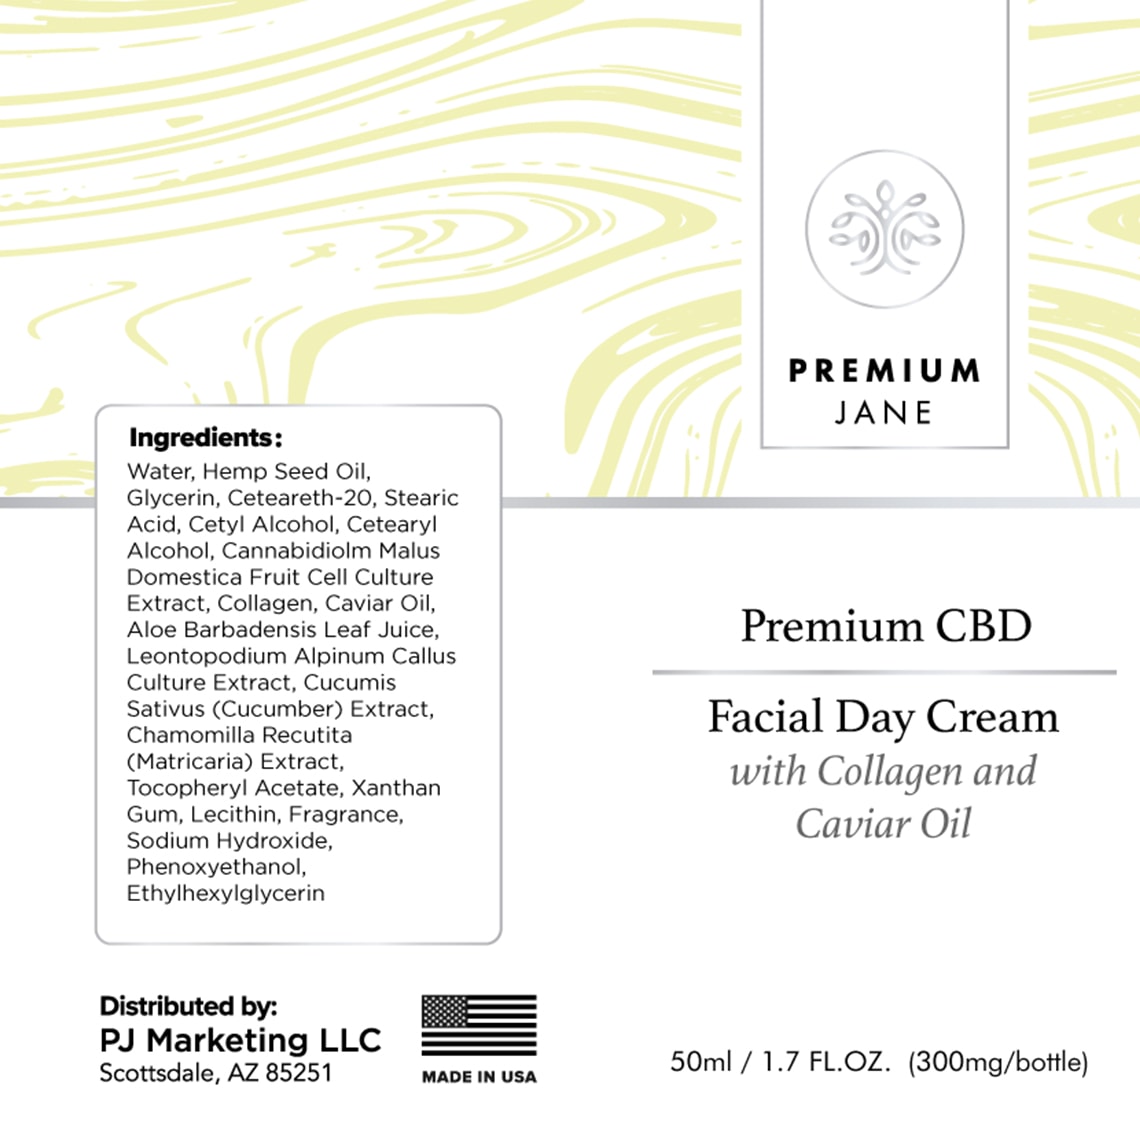 pj-product-page-300mg-cbd-facial-day-cream-3 - preview